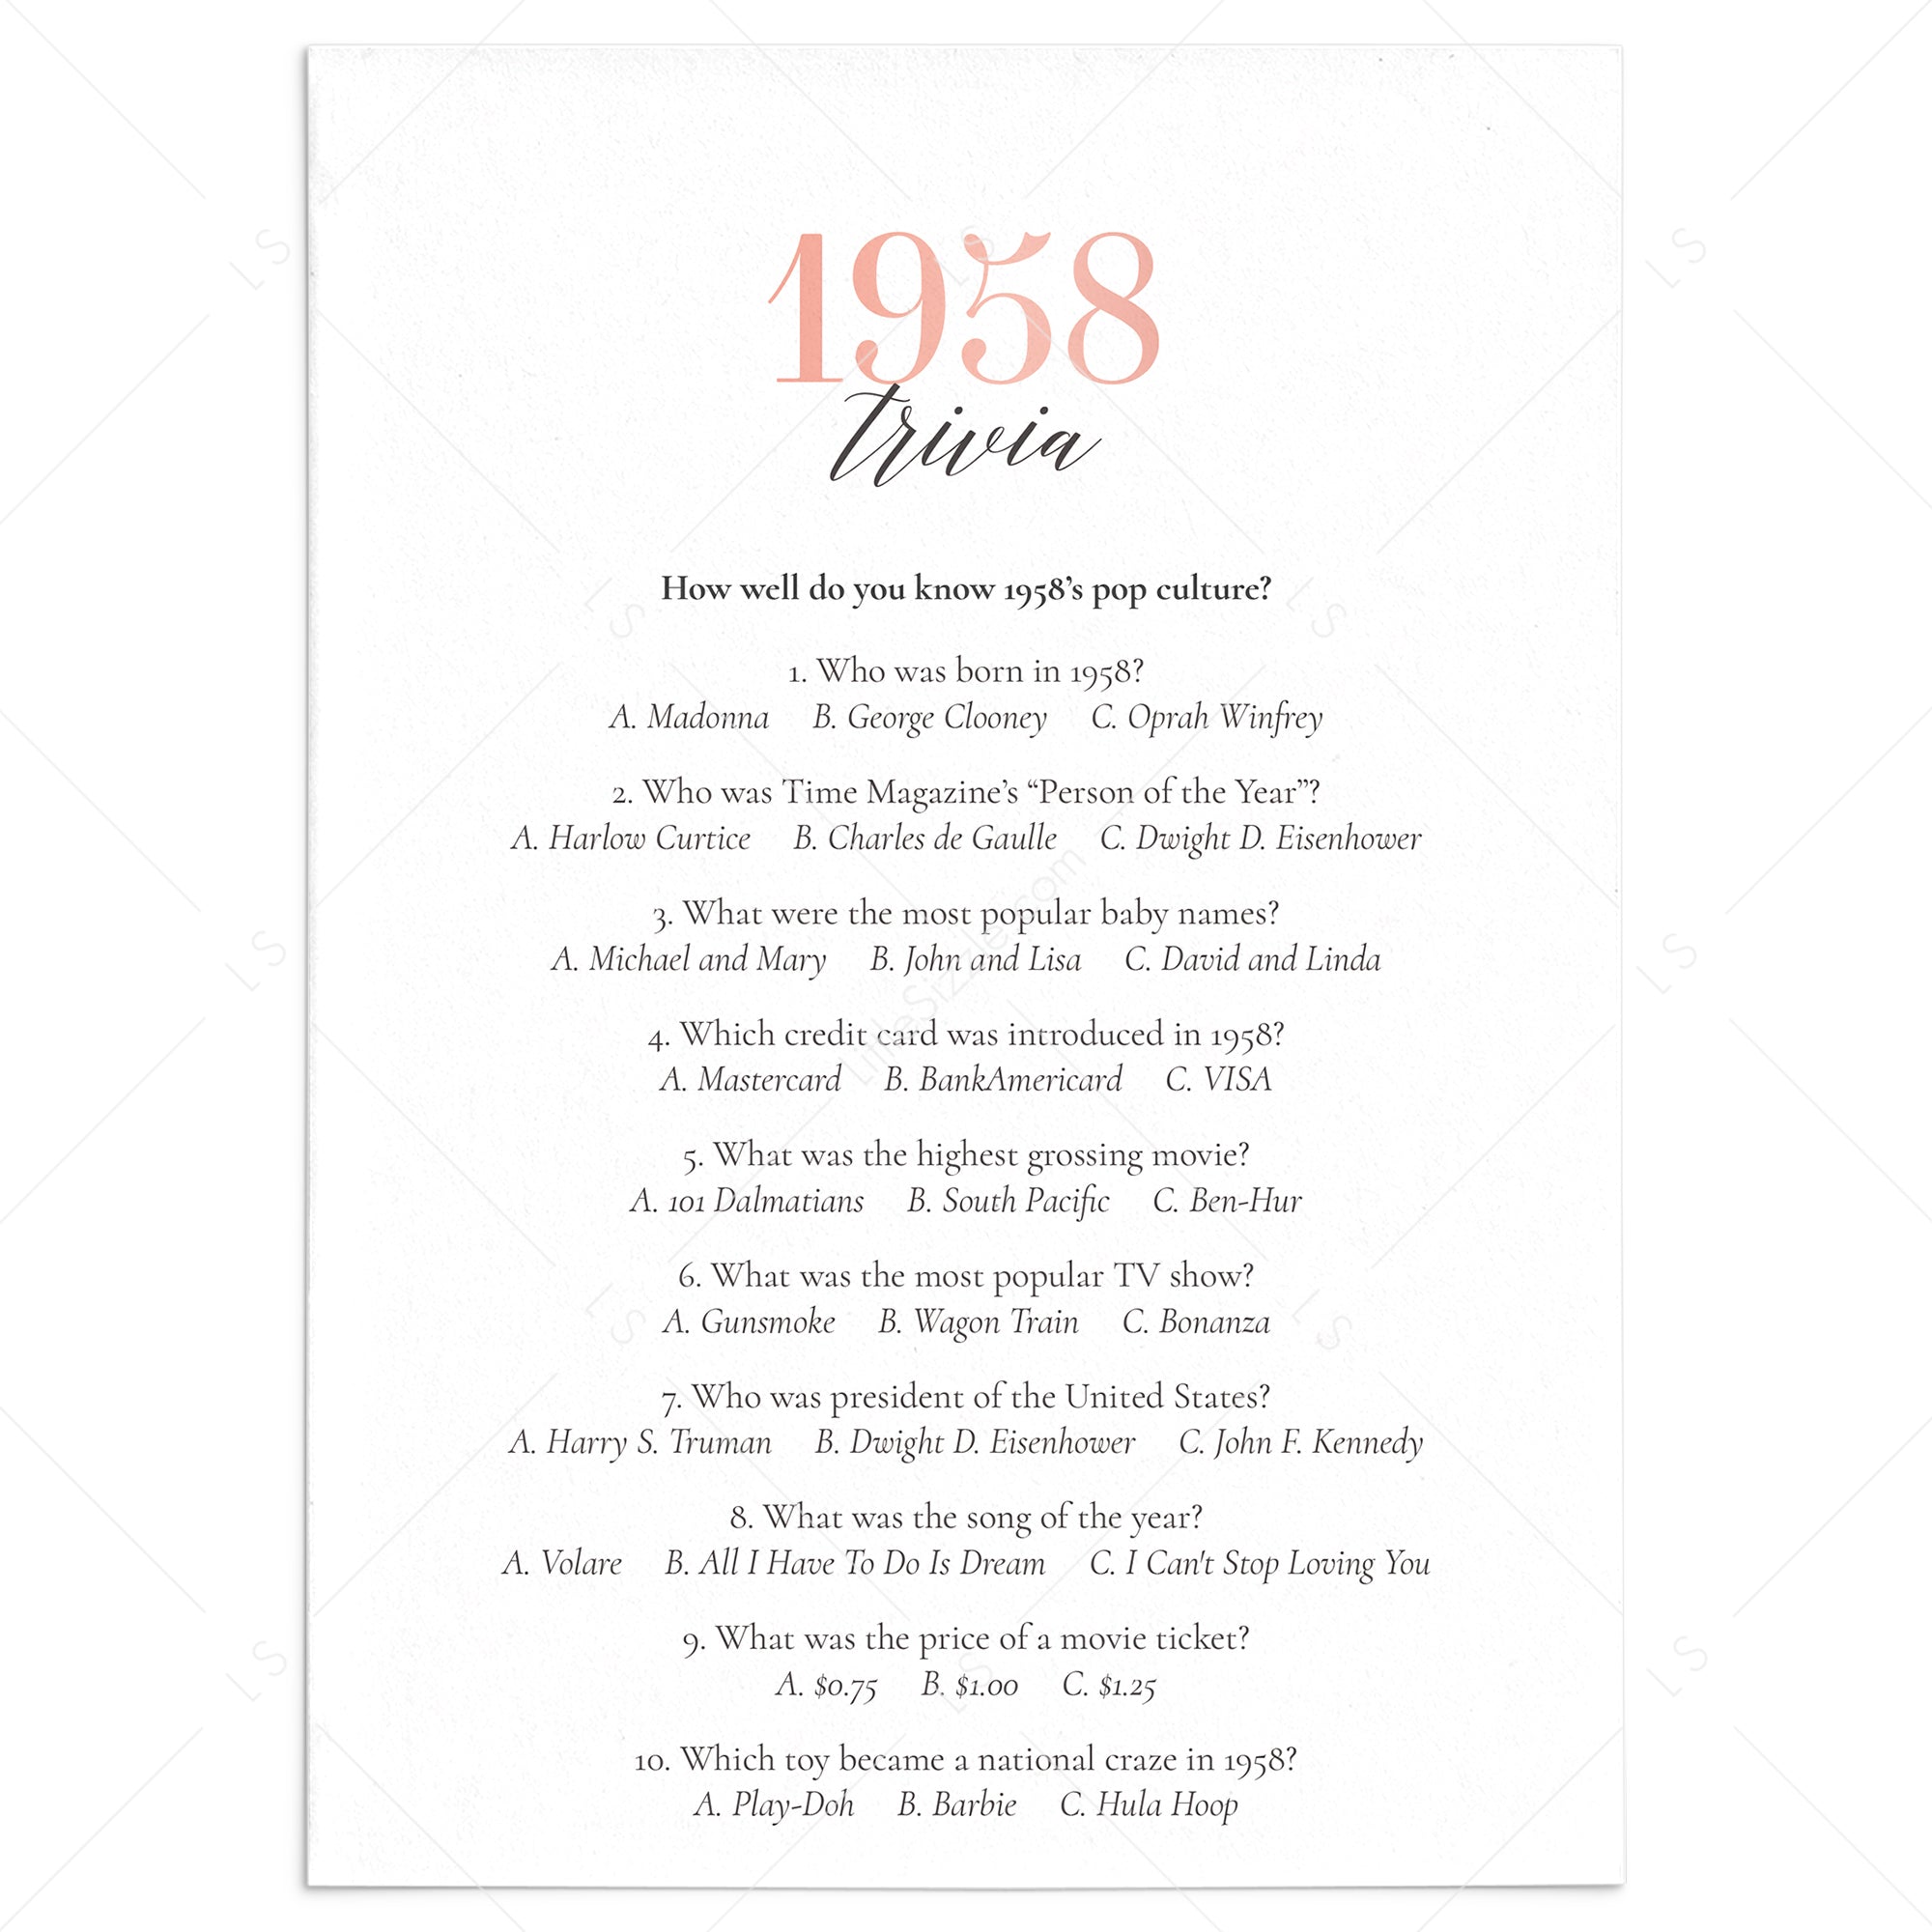 1958 Trivia Questions and Answers Printable by LittleSizzle